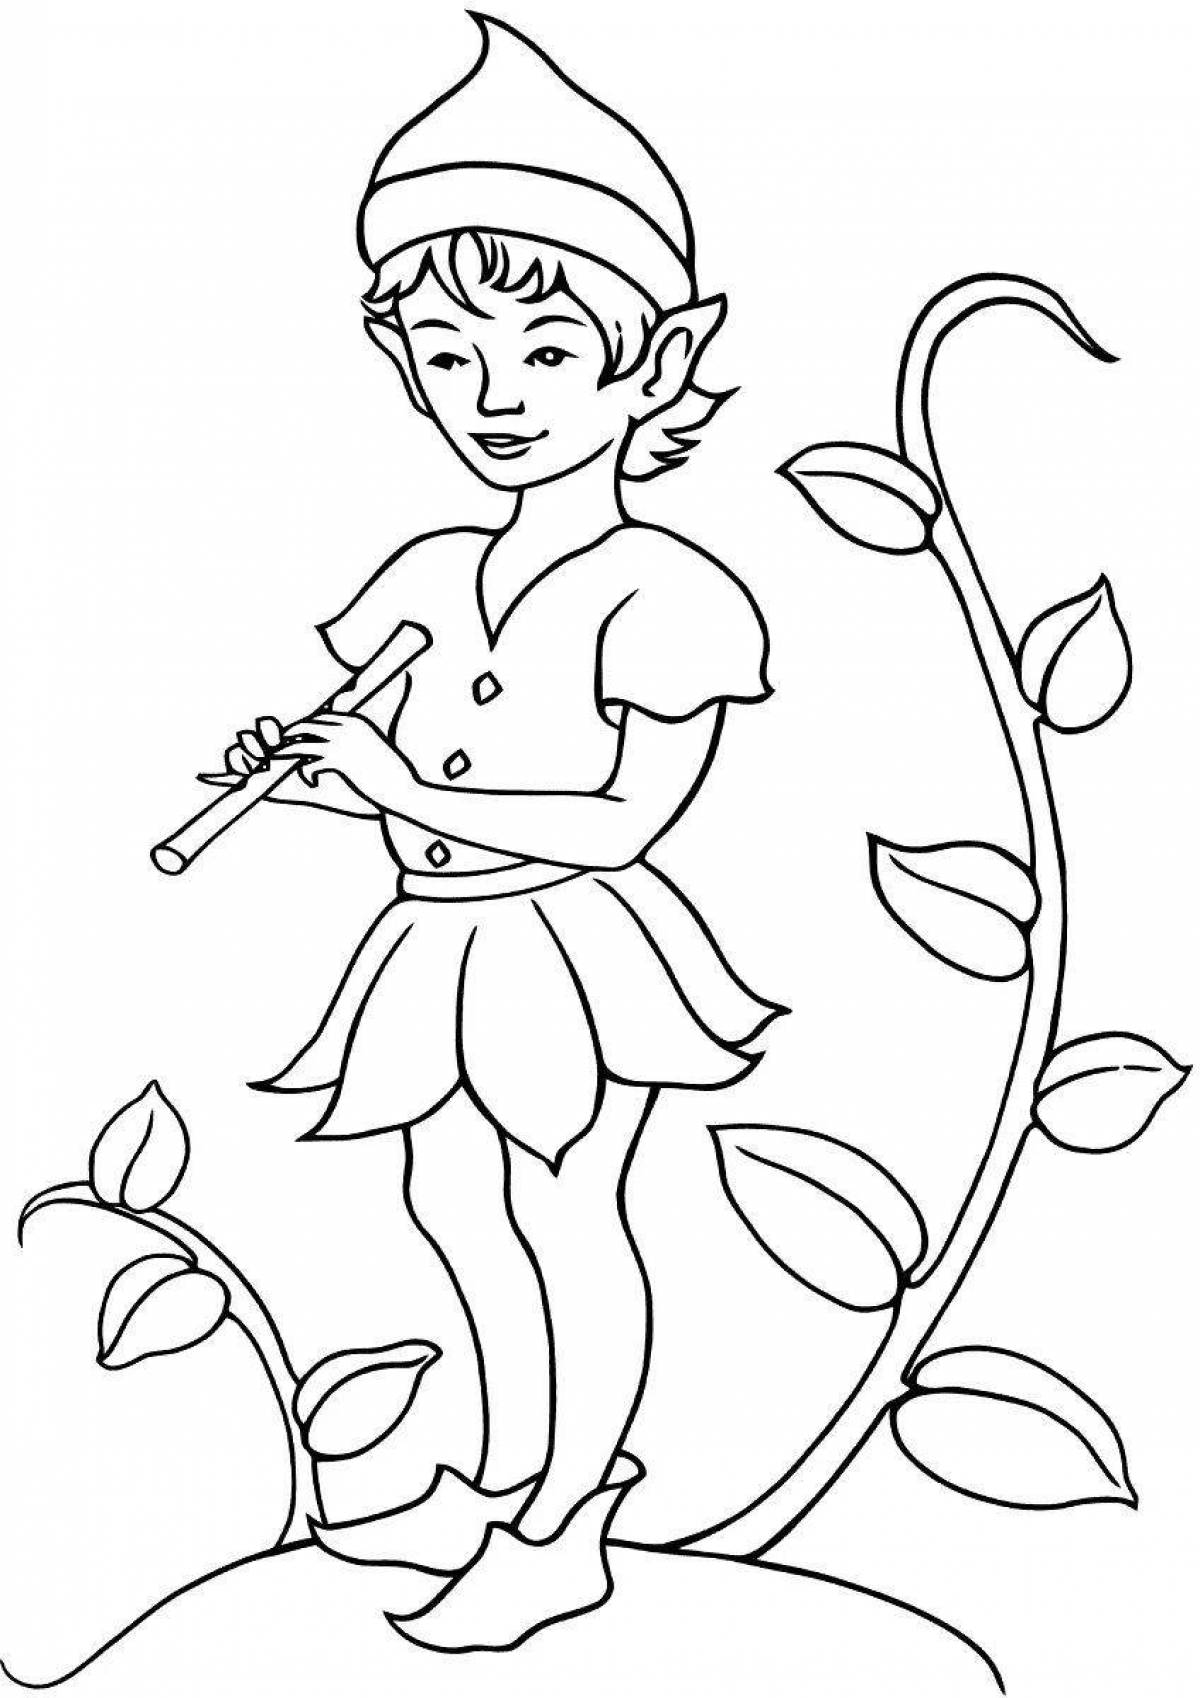 Coloring page joyful flute and jug